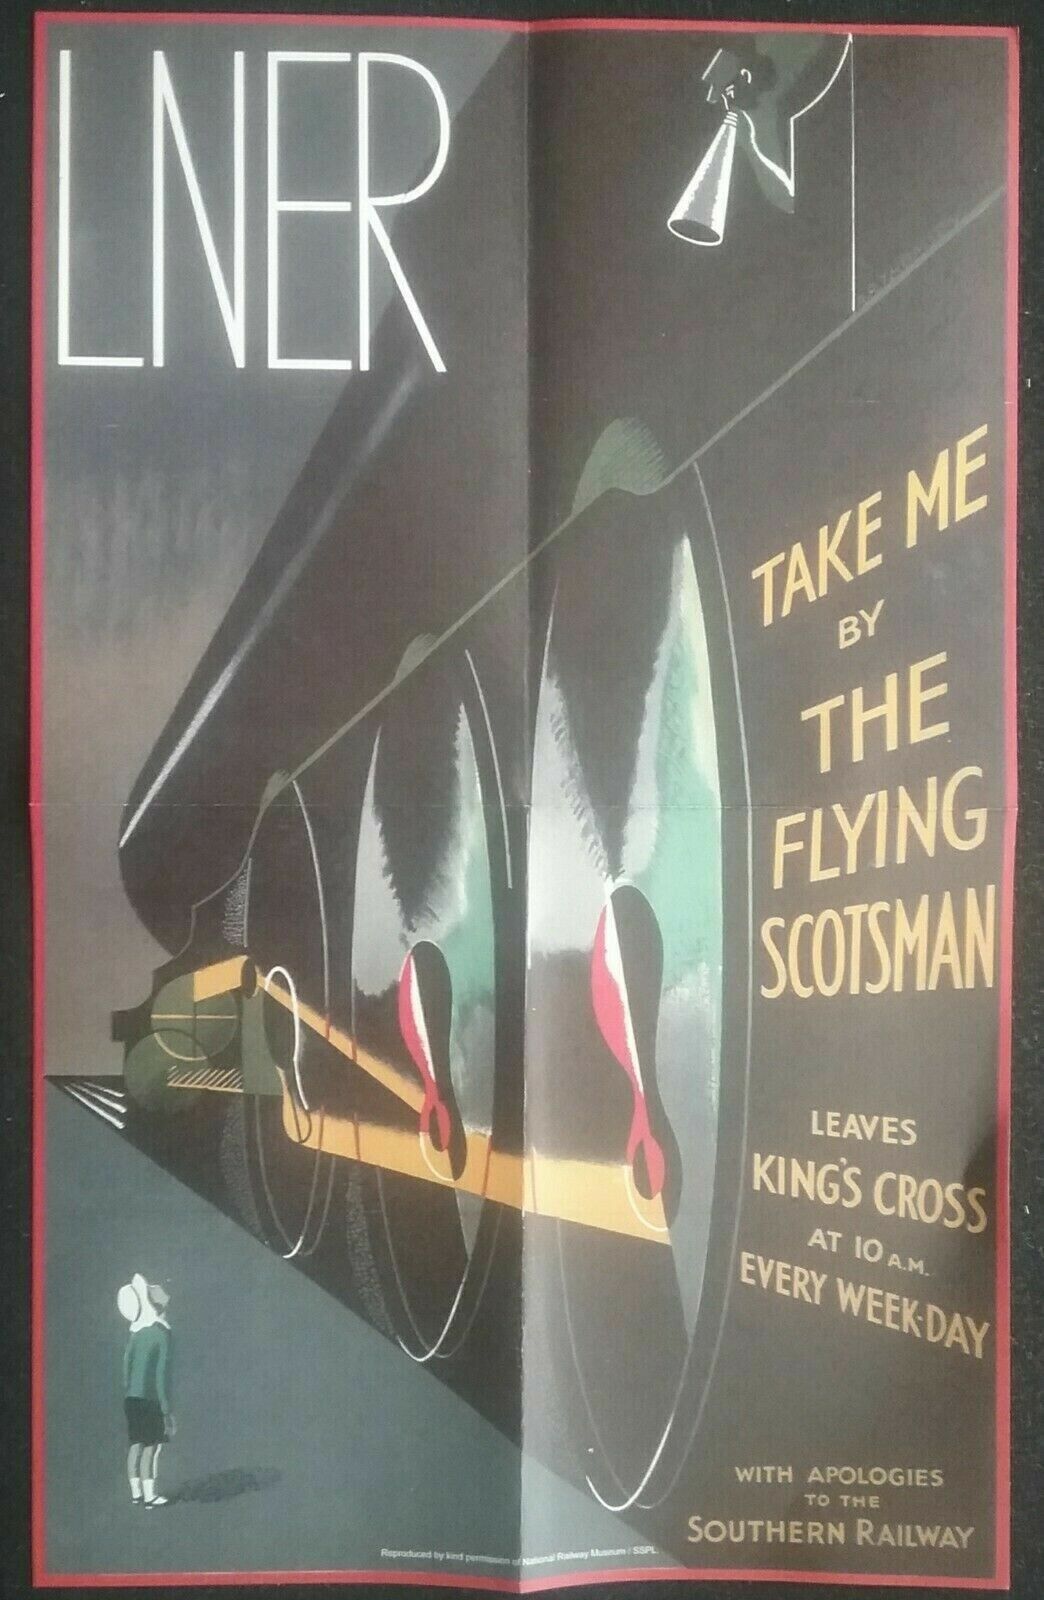 FLYING SCOTSMAN  : ICONIC POSTER OF THE LNER THE 2 SIDED POSTER *(Reproduction)*